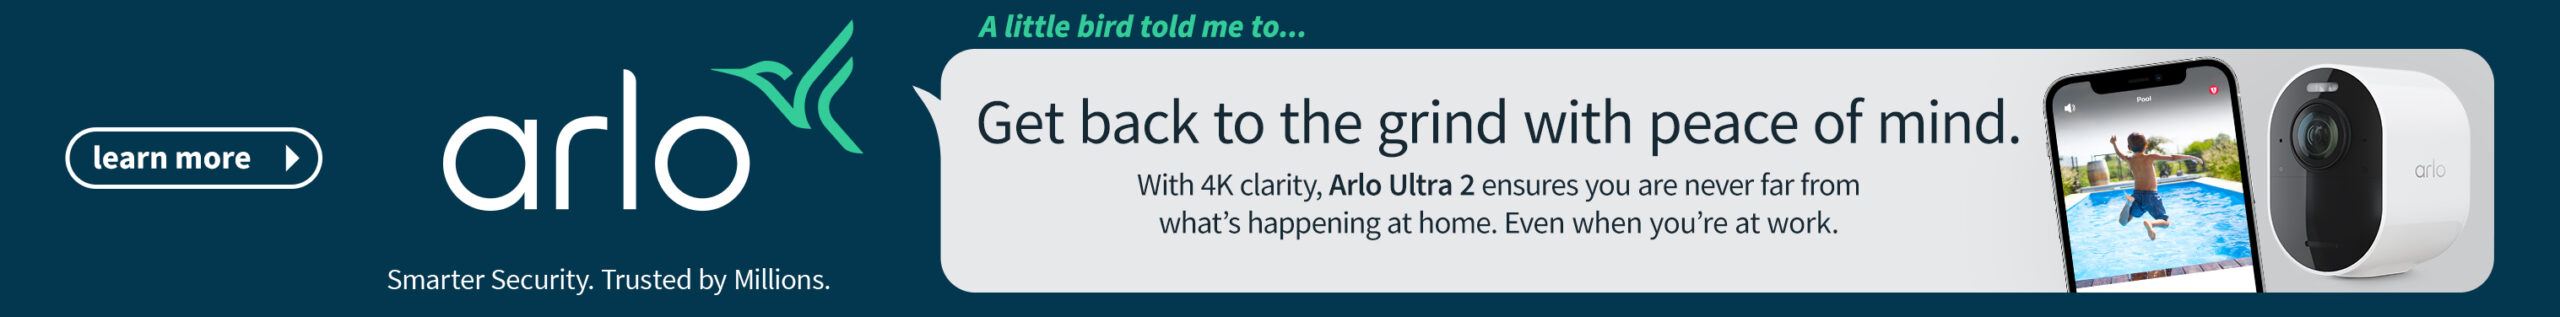 ARL0508 Arlo Ultra 2 NY Banner 728x90px 300dpi V1 scaled Will LG’s Foldable Smartphone Have a ‘Hand Strap’?